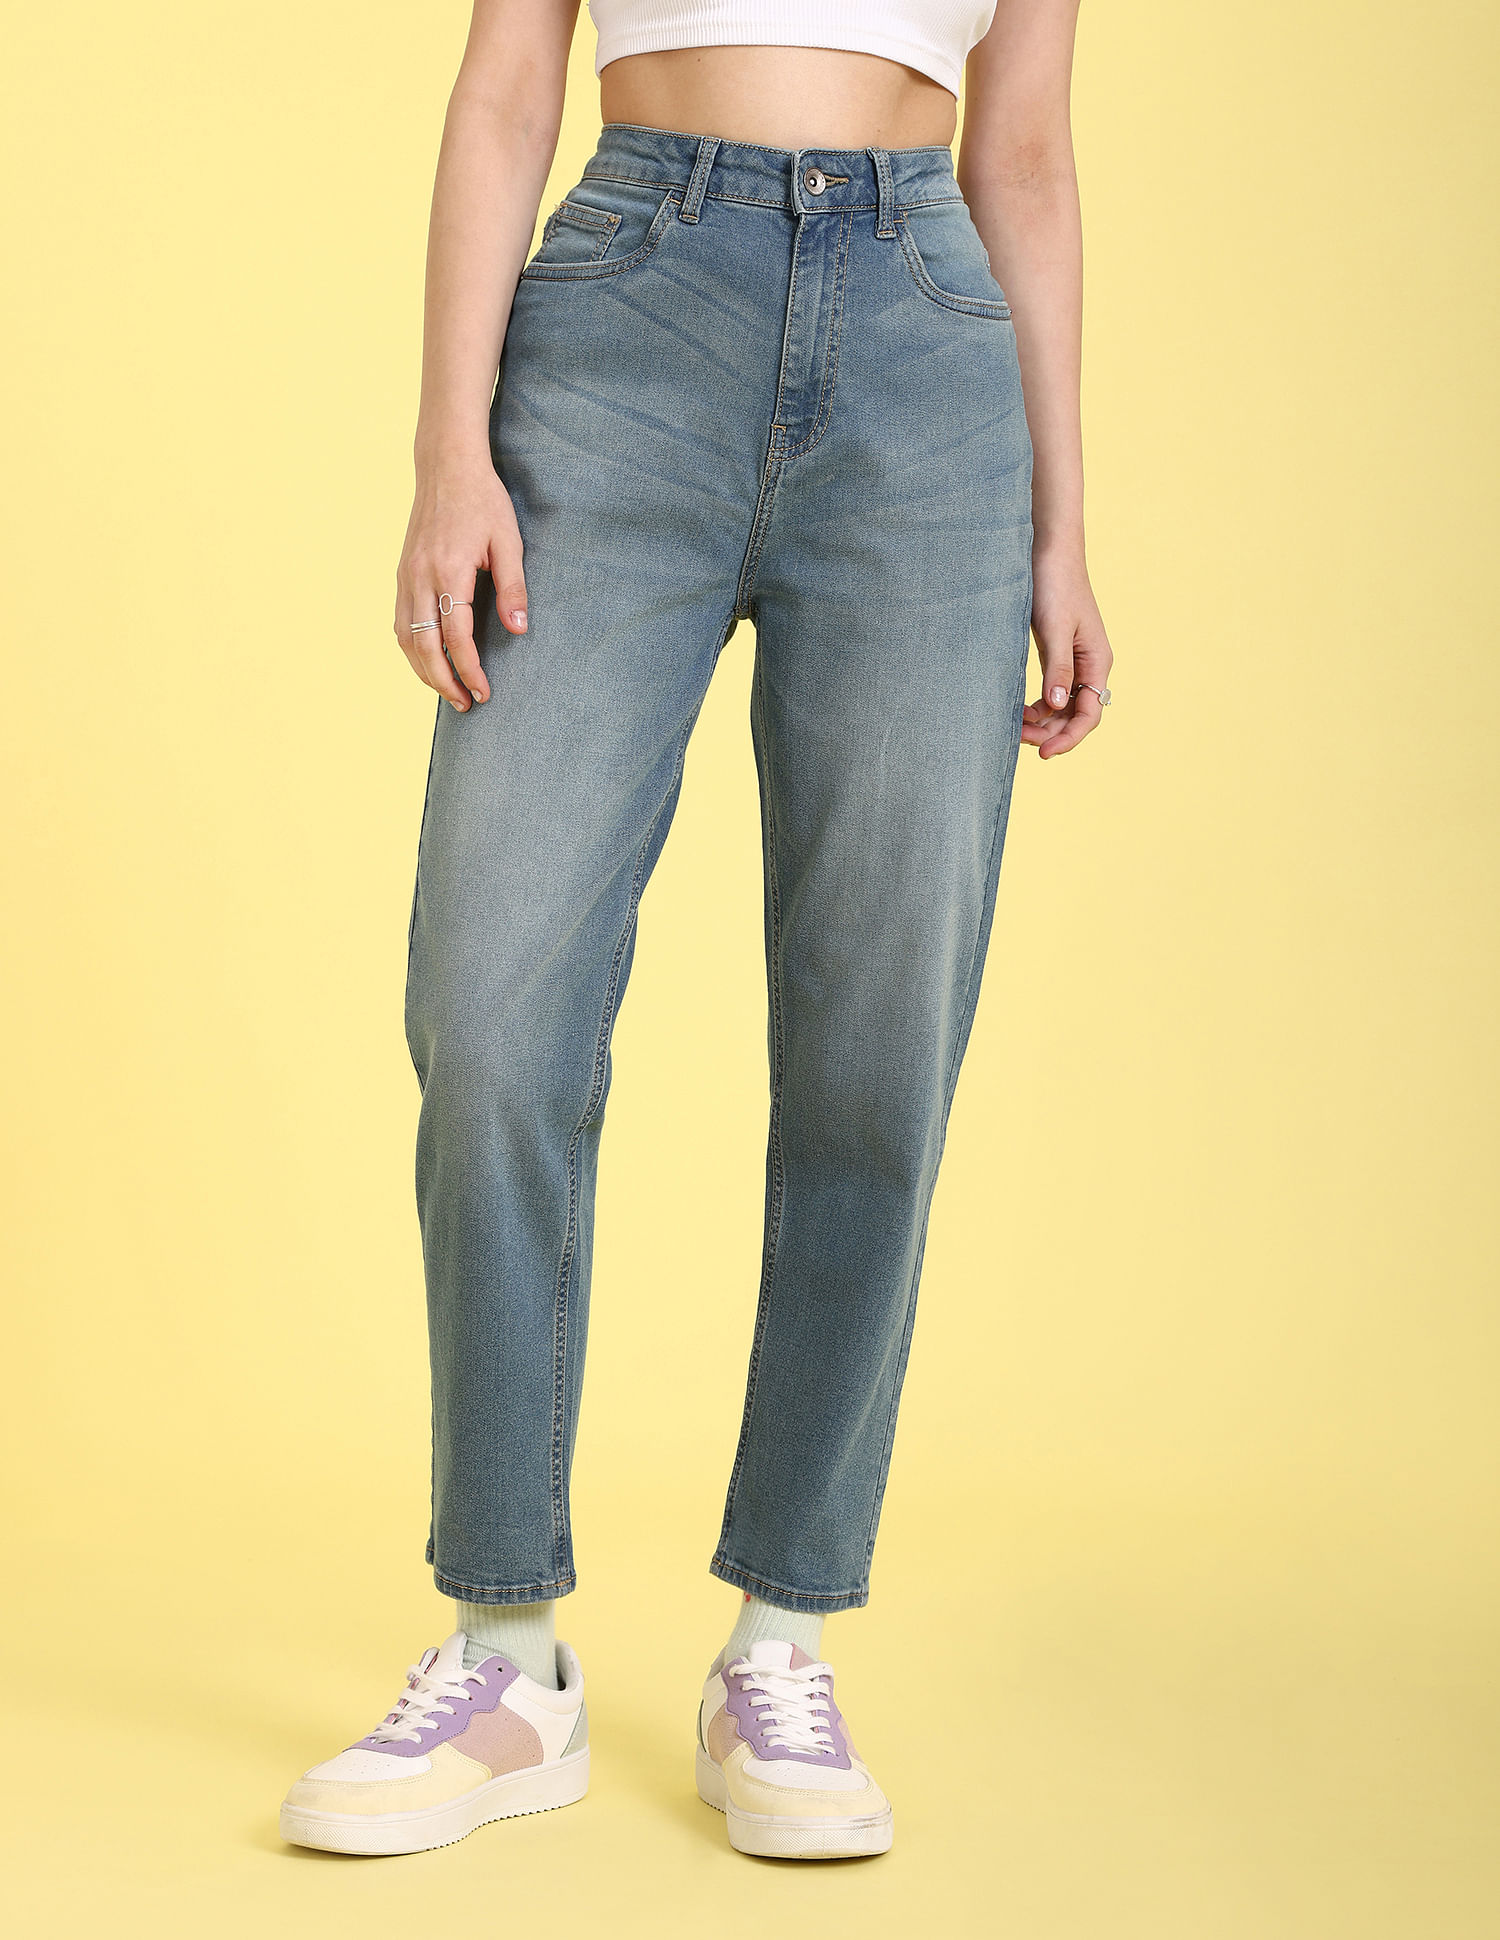 Buy Grey Jeans & Jeggings for Women by Outryt Online | Ajio.com-saigonsouth.com.vn